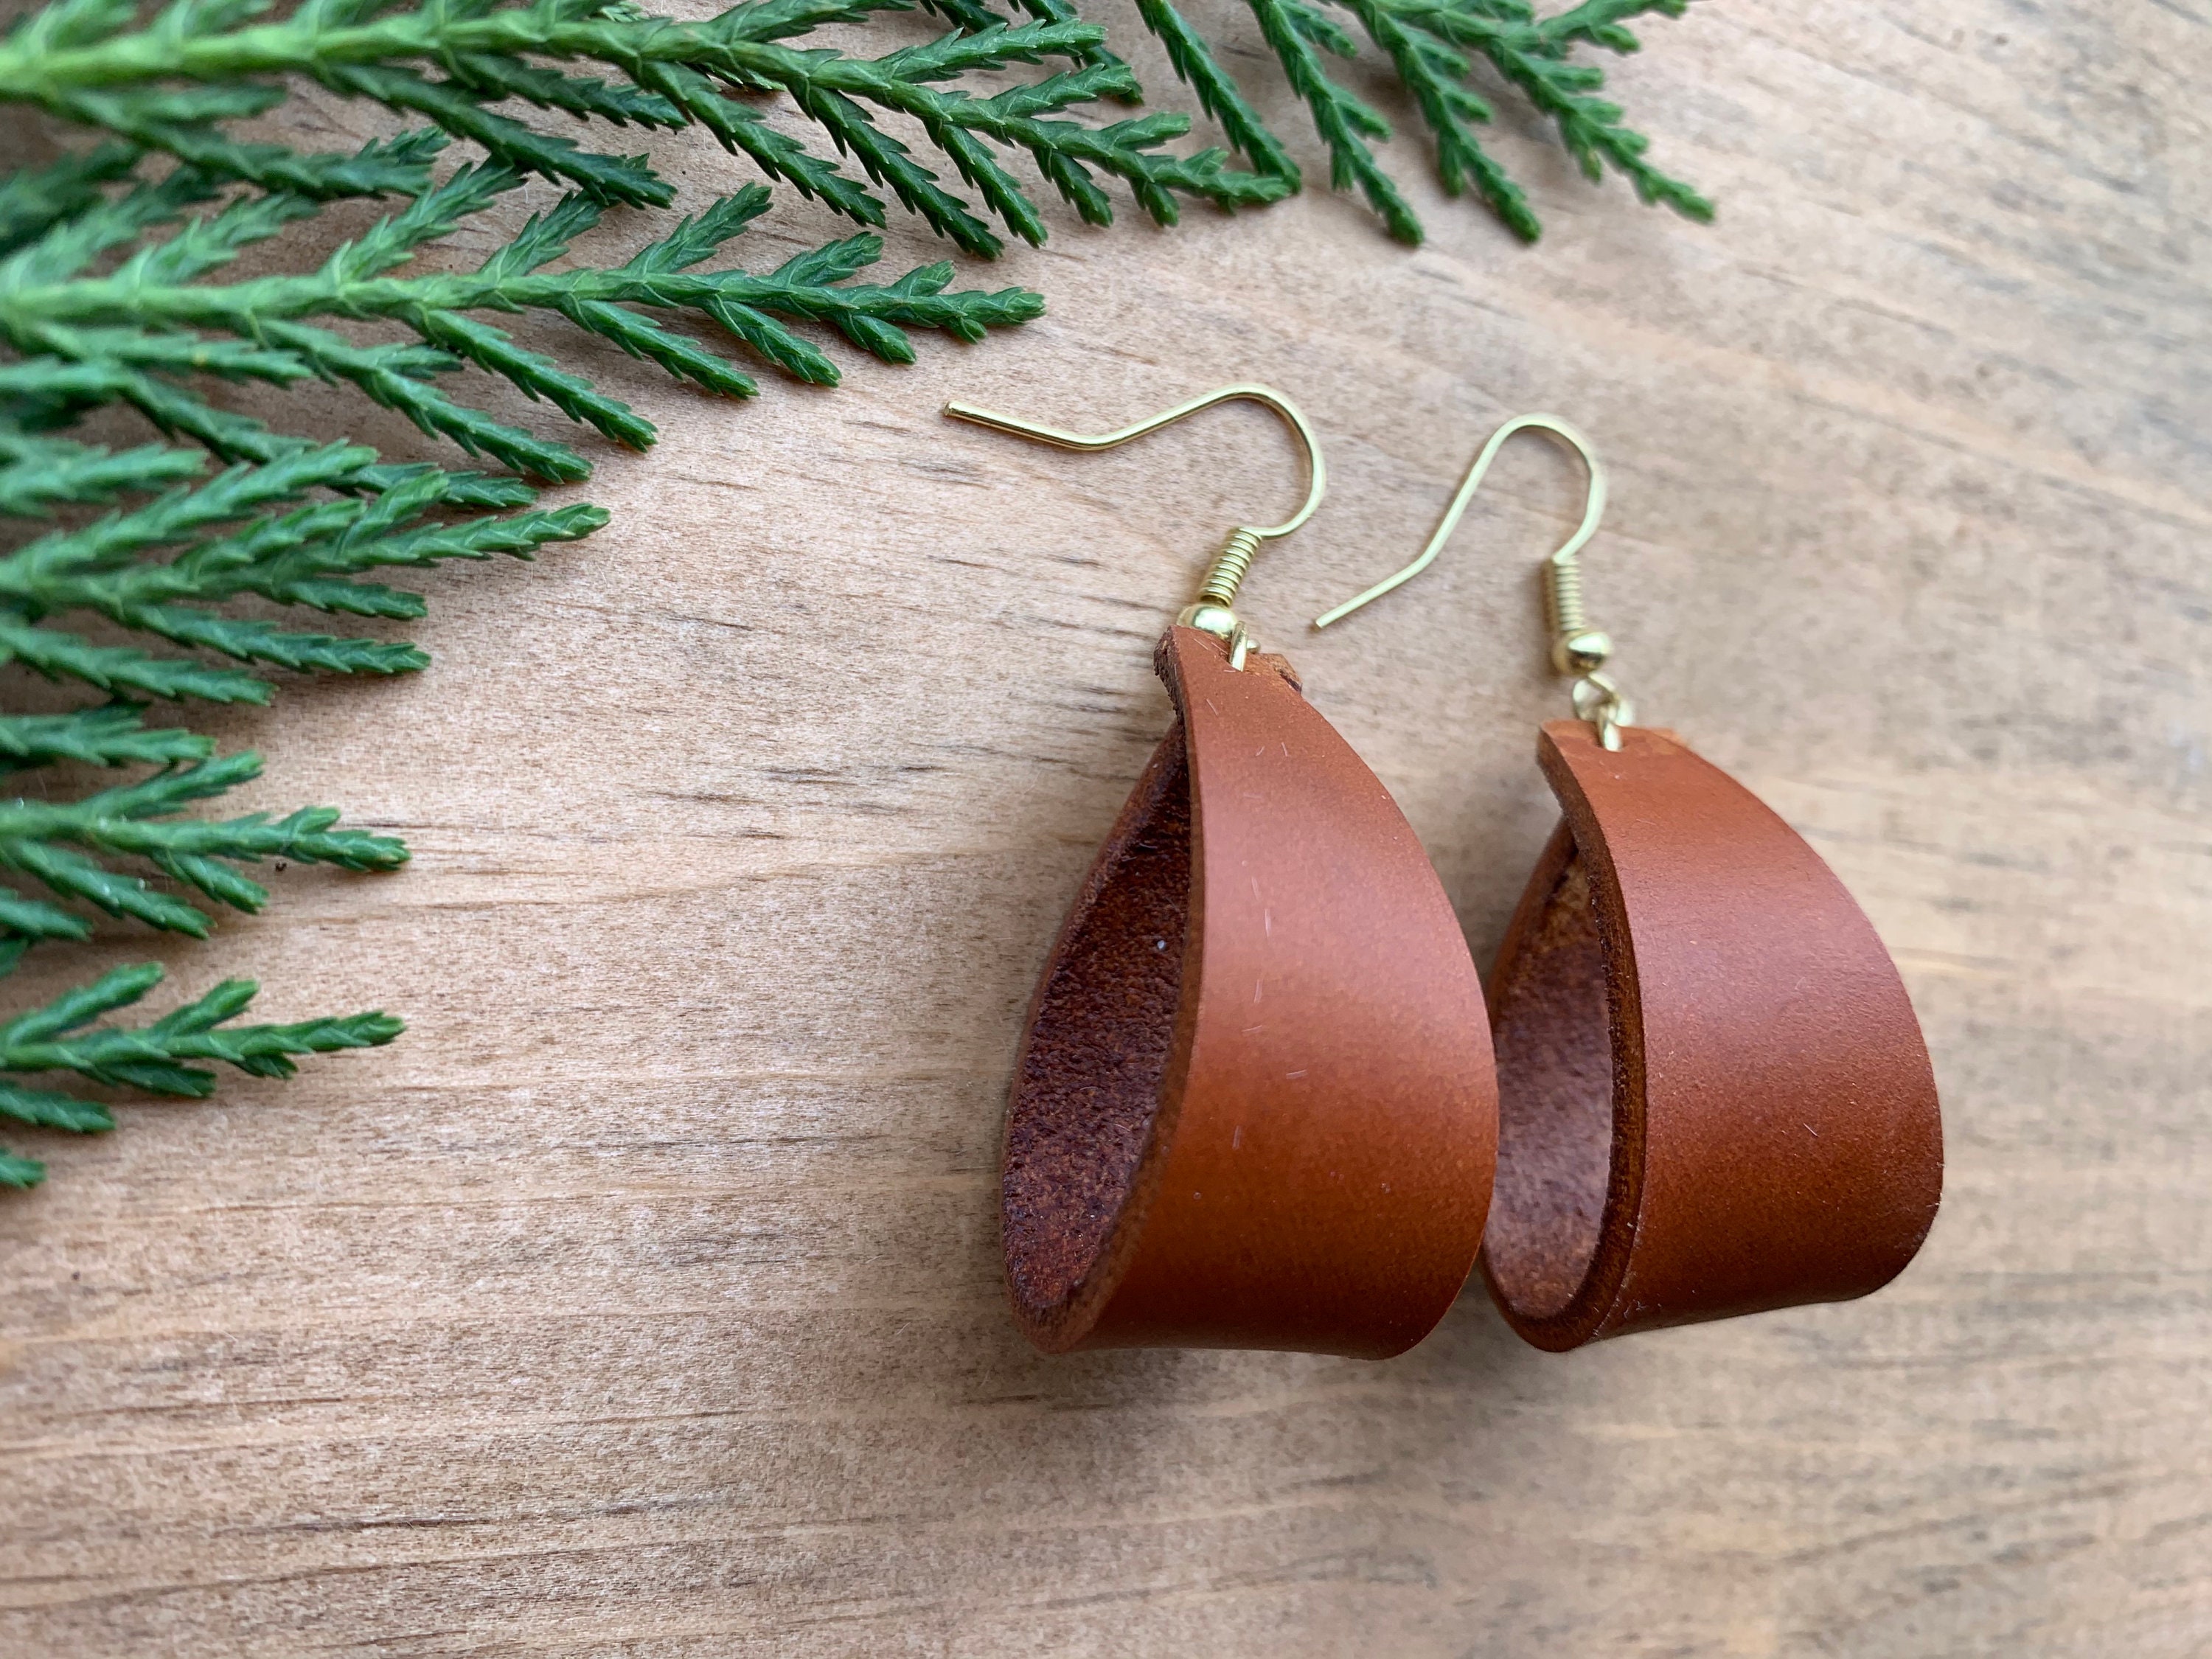 How to Make Leather Earrings: 25 DIY Leather Earring Ideas